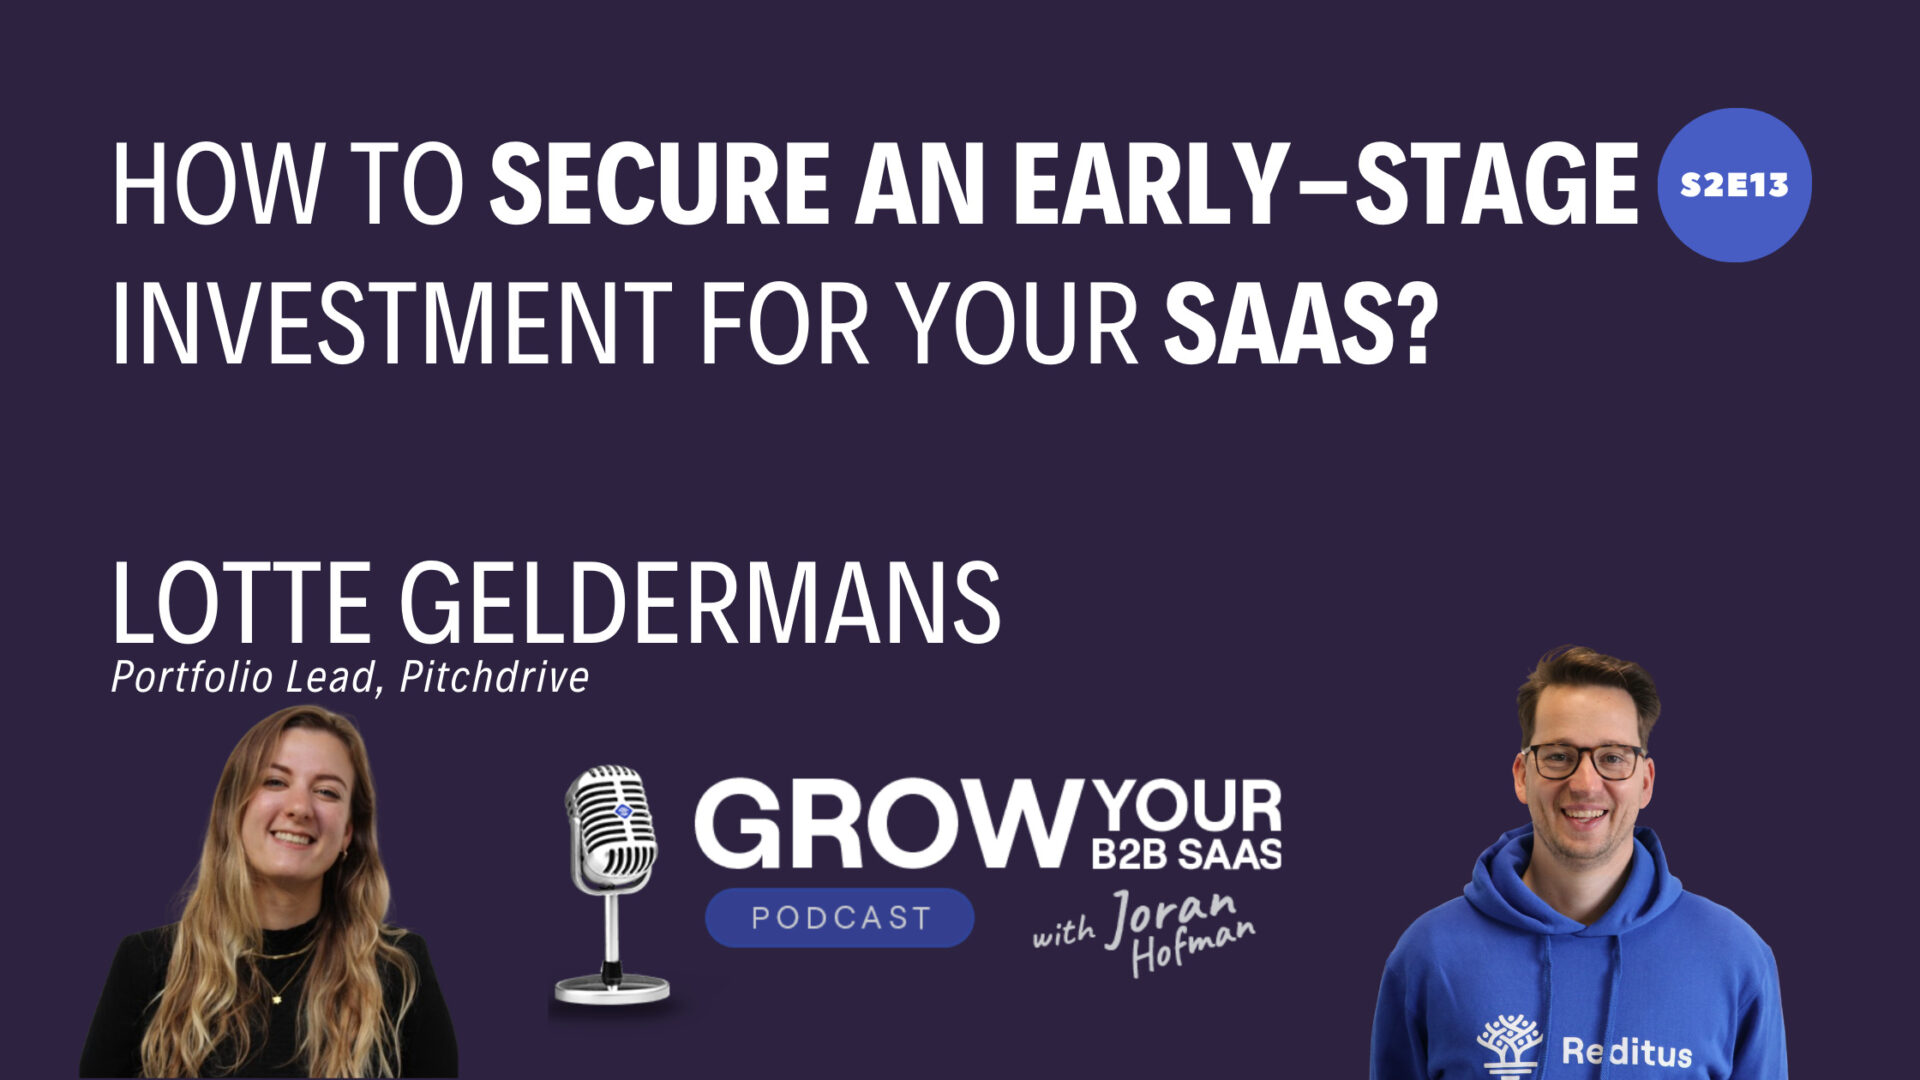 https://www.getreditus.com/podcast/s2e13-how-to-secure-an-early-stage-investment-for-your-saas-with-lotte-geldermans/